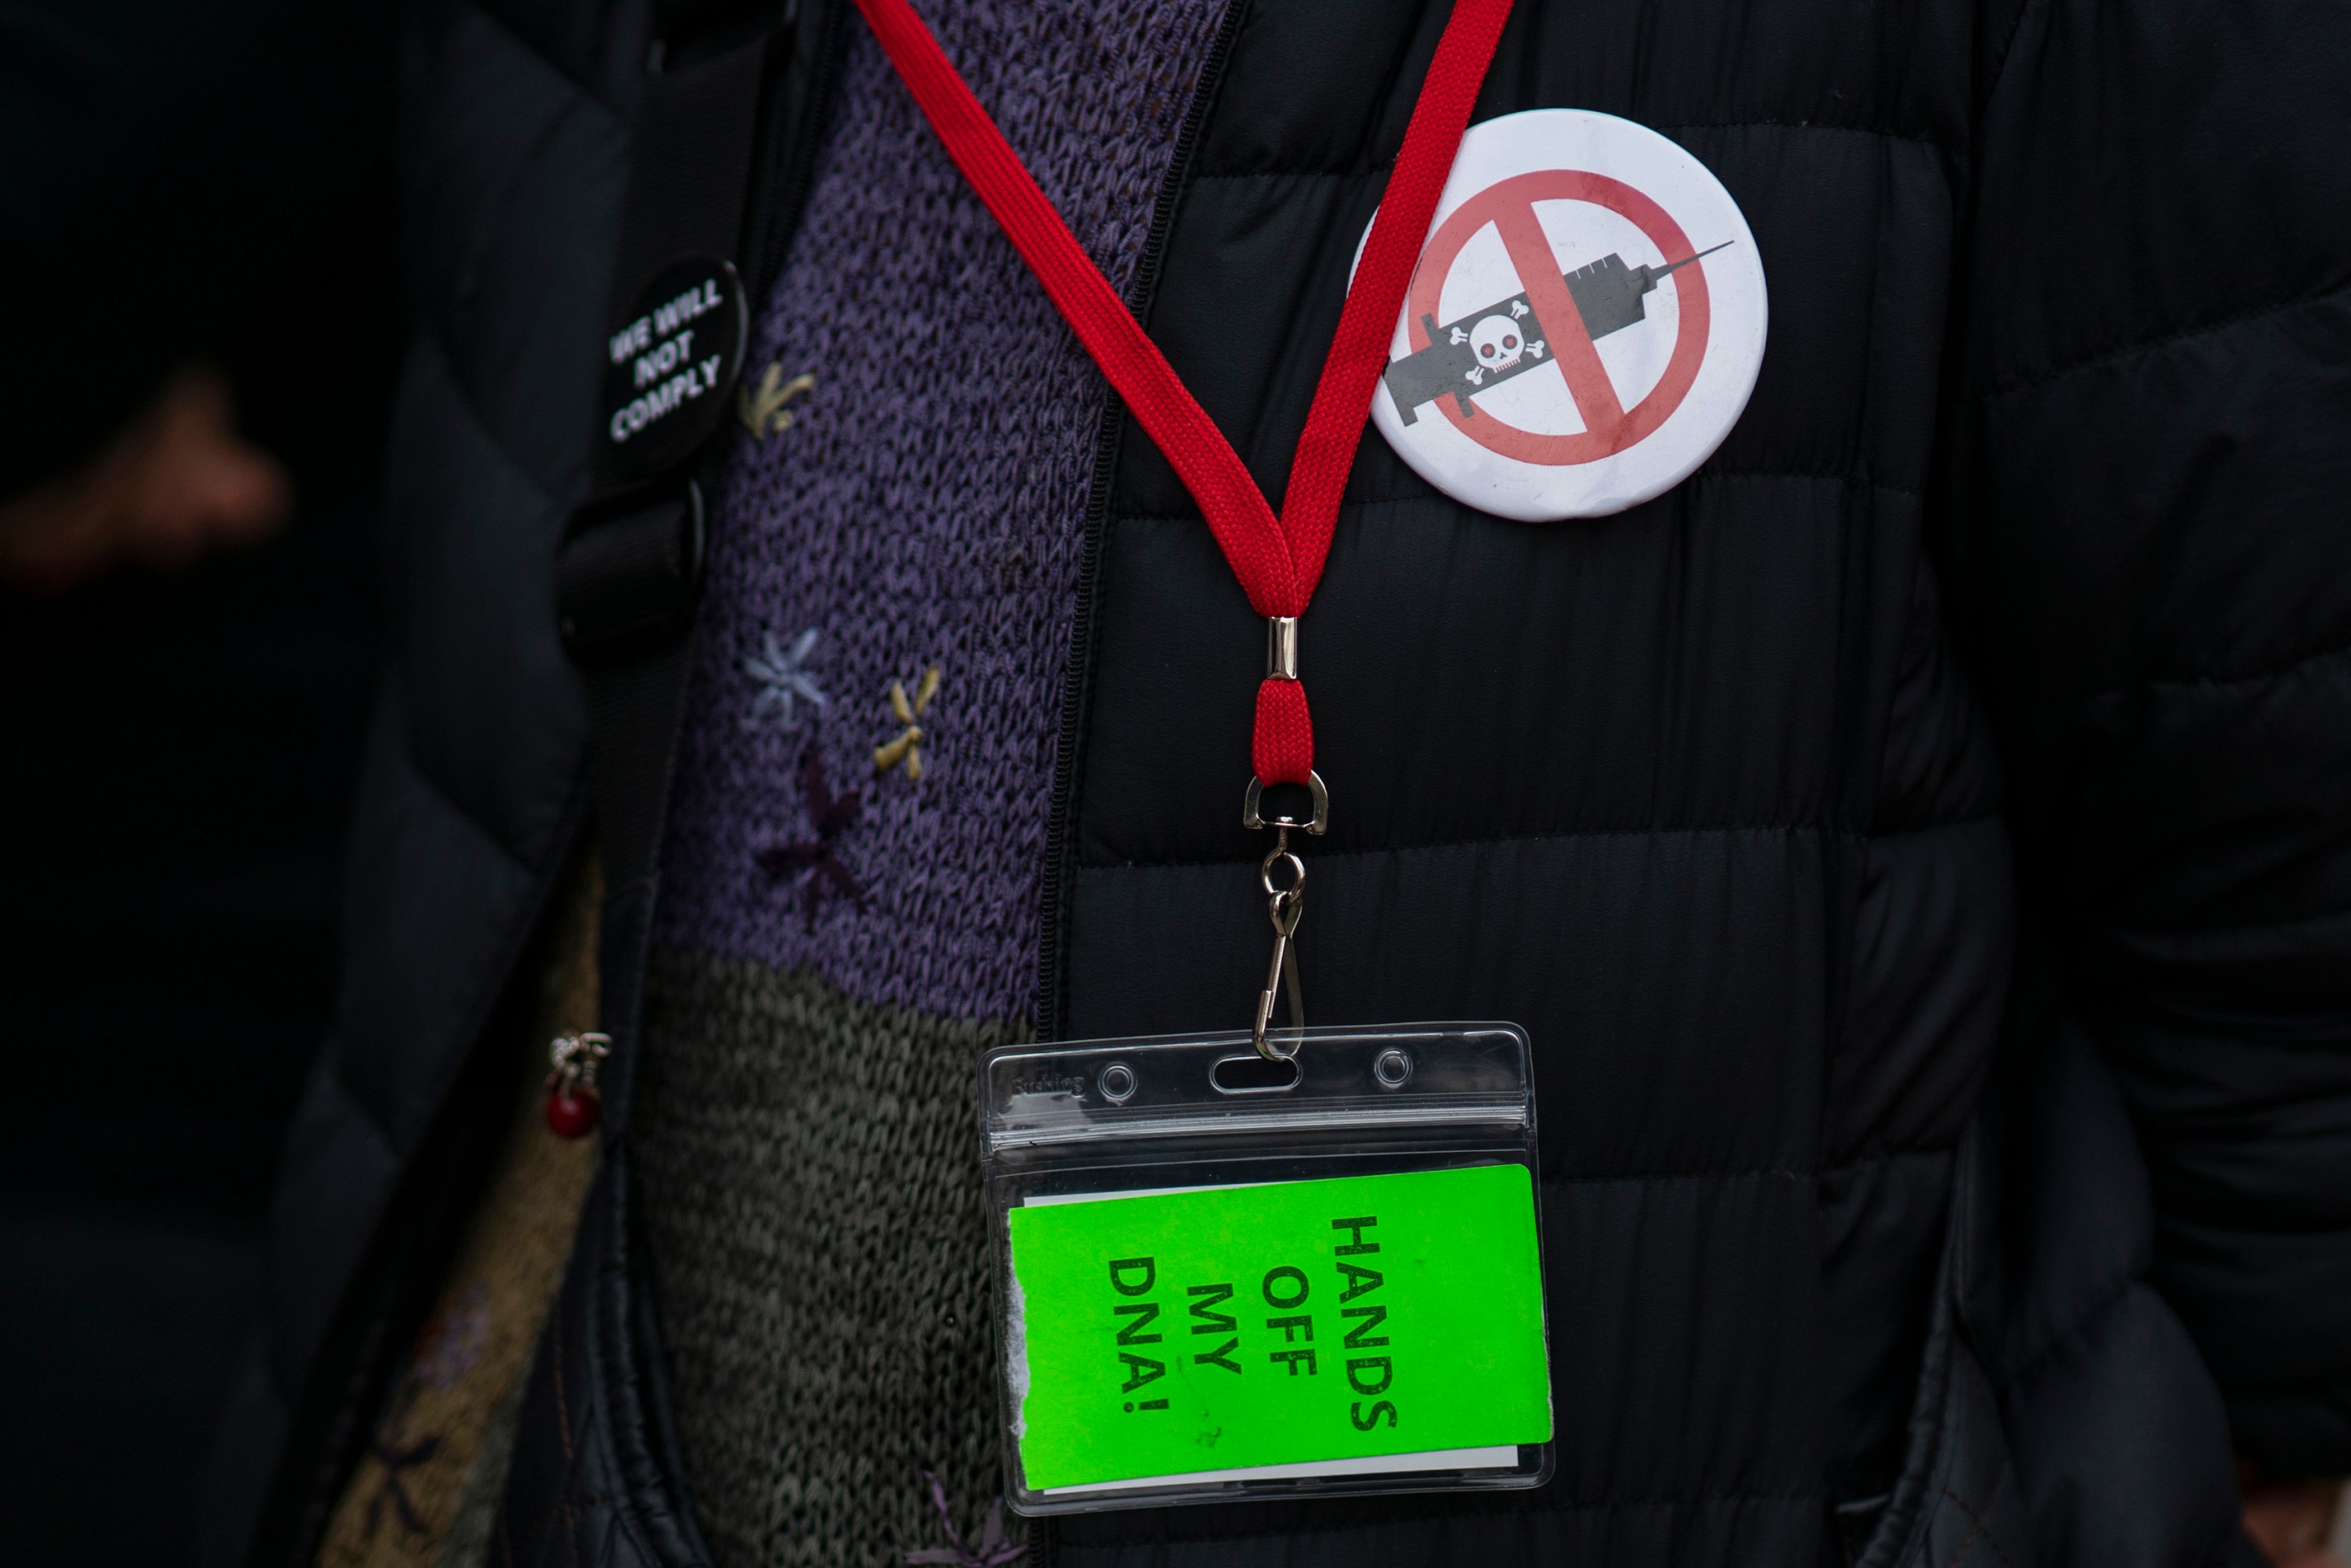 photograph of someones badge saying "hands off my dna!"